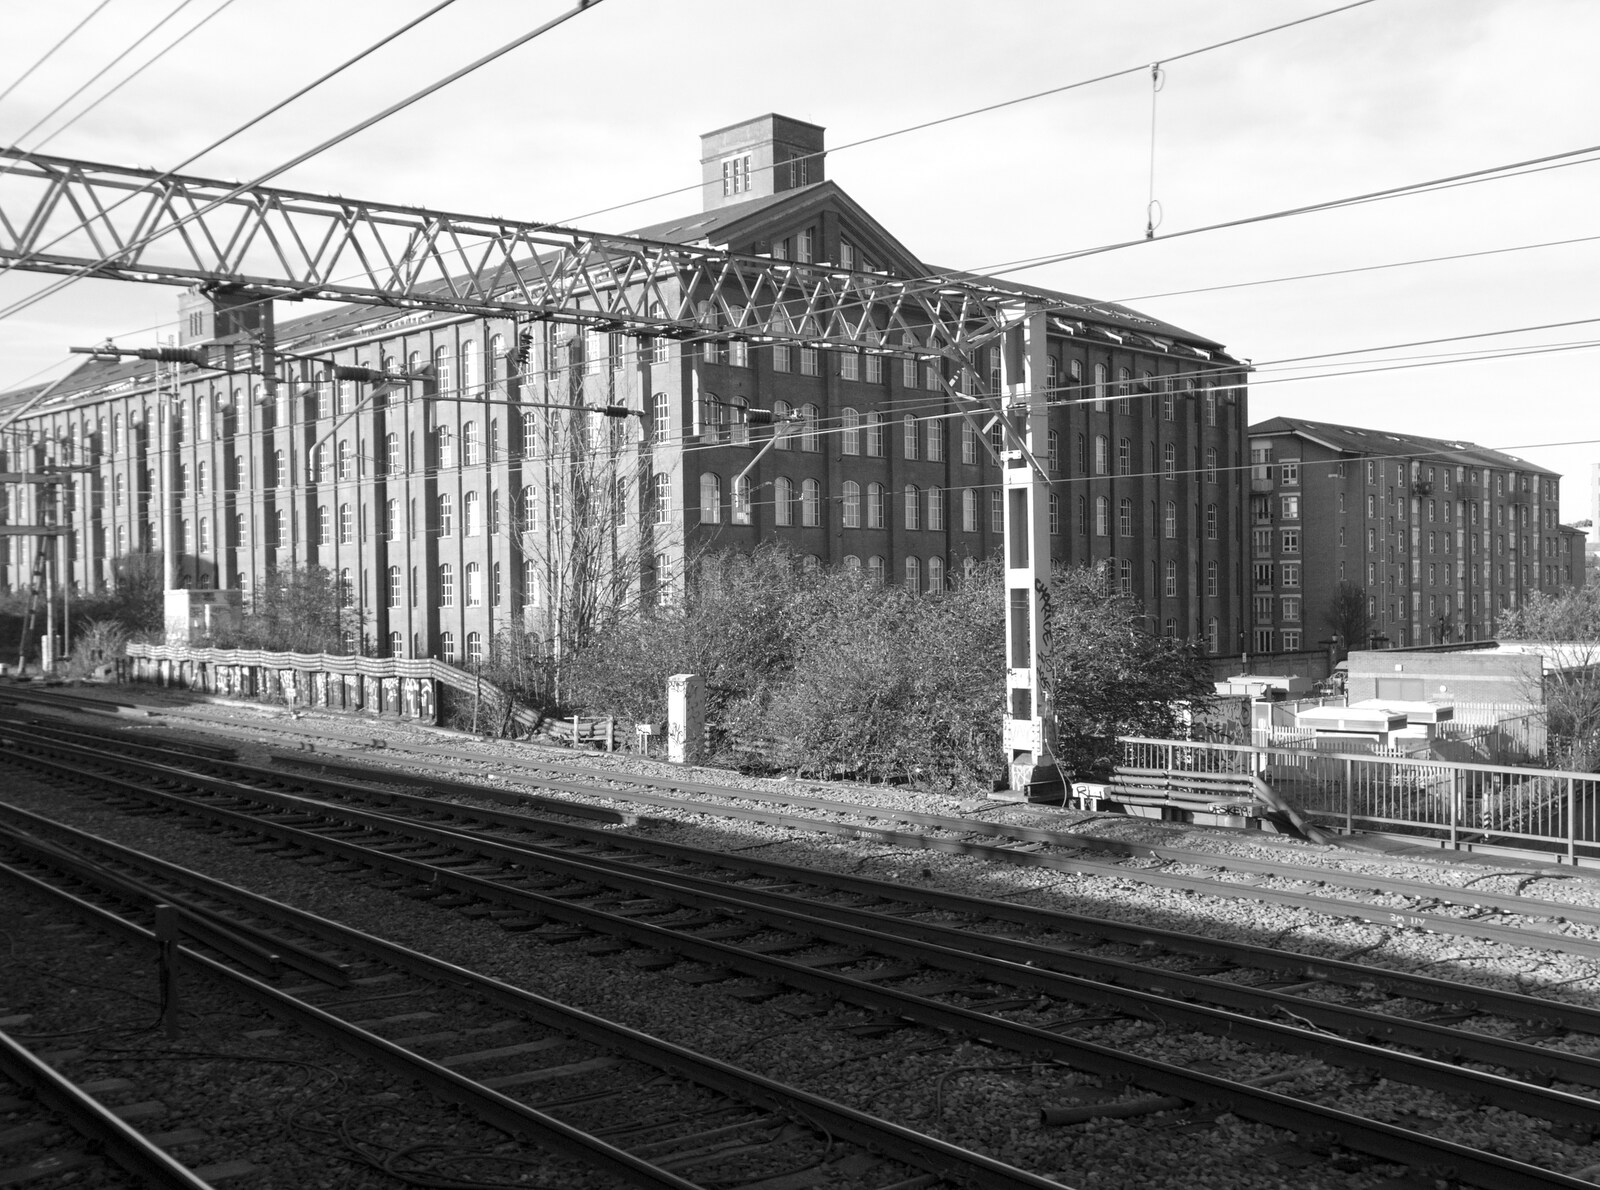 Broken-down Freight Trains, Manor Park, London - 28th January 2020: The big converted warehouse/factory by the A12